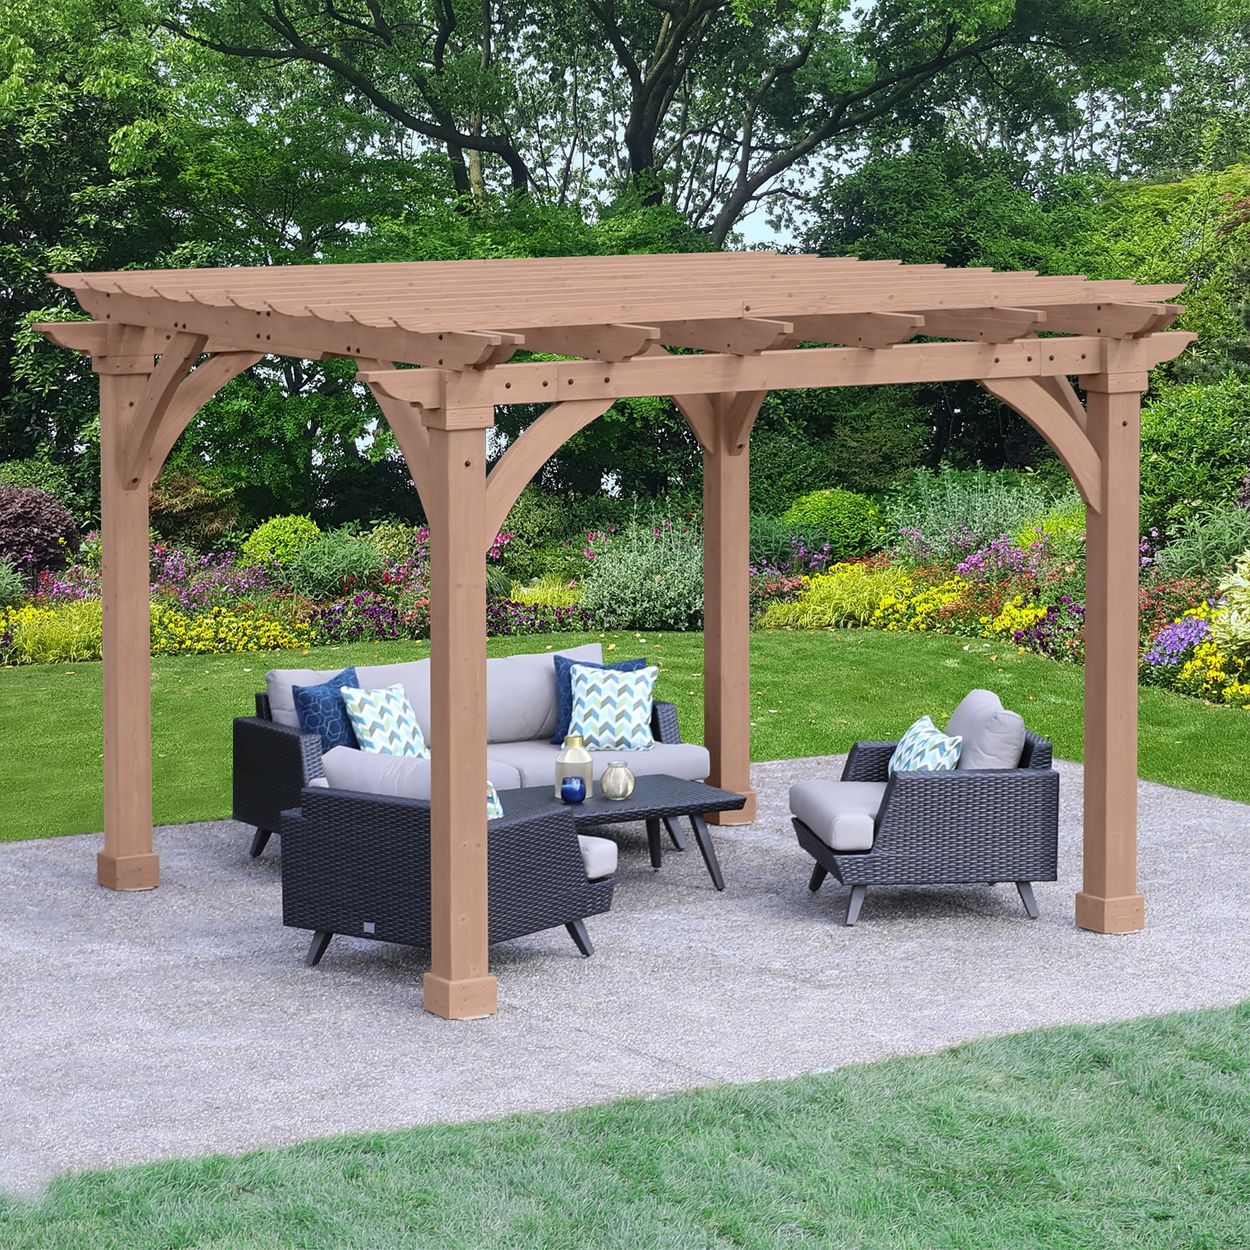 Angled view of Pergola with chairs